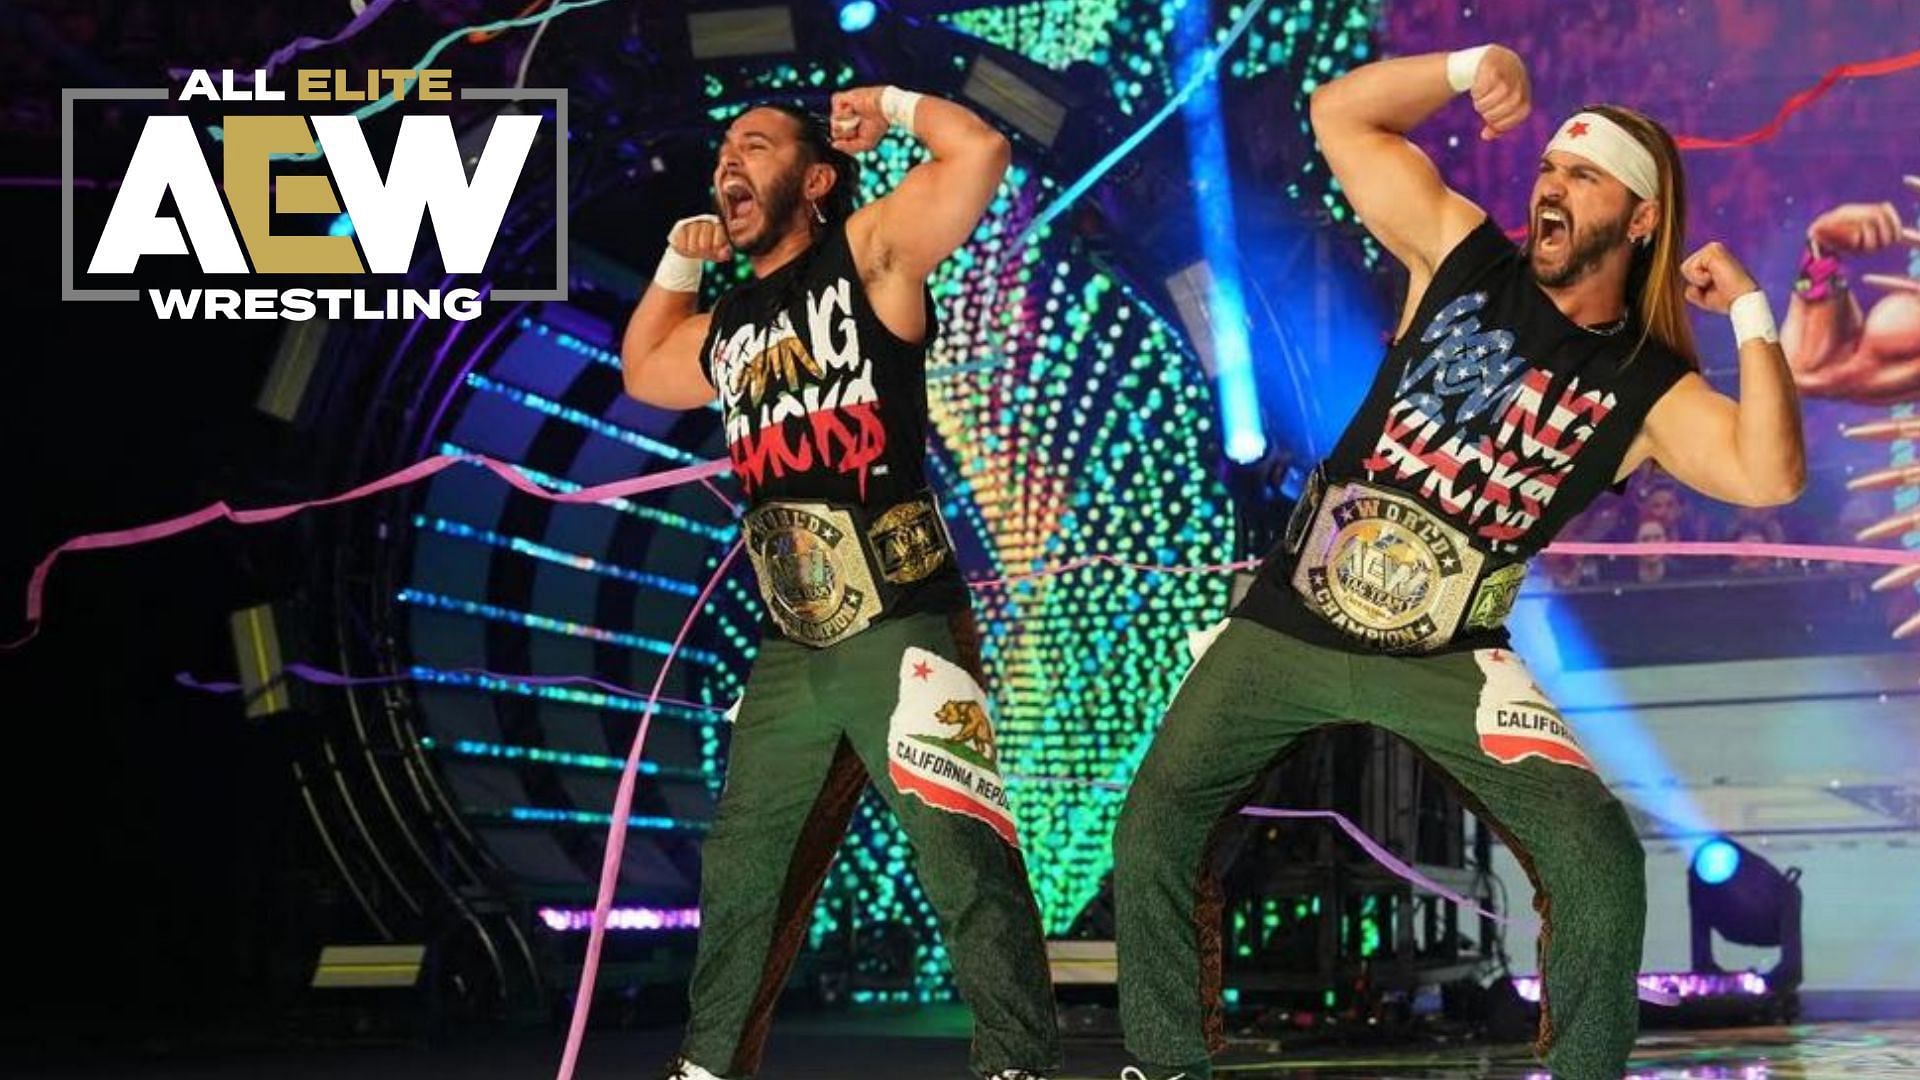 The Young Bucks are the AEW Trios Champion